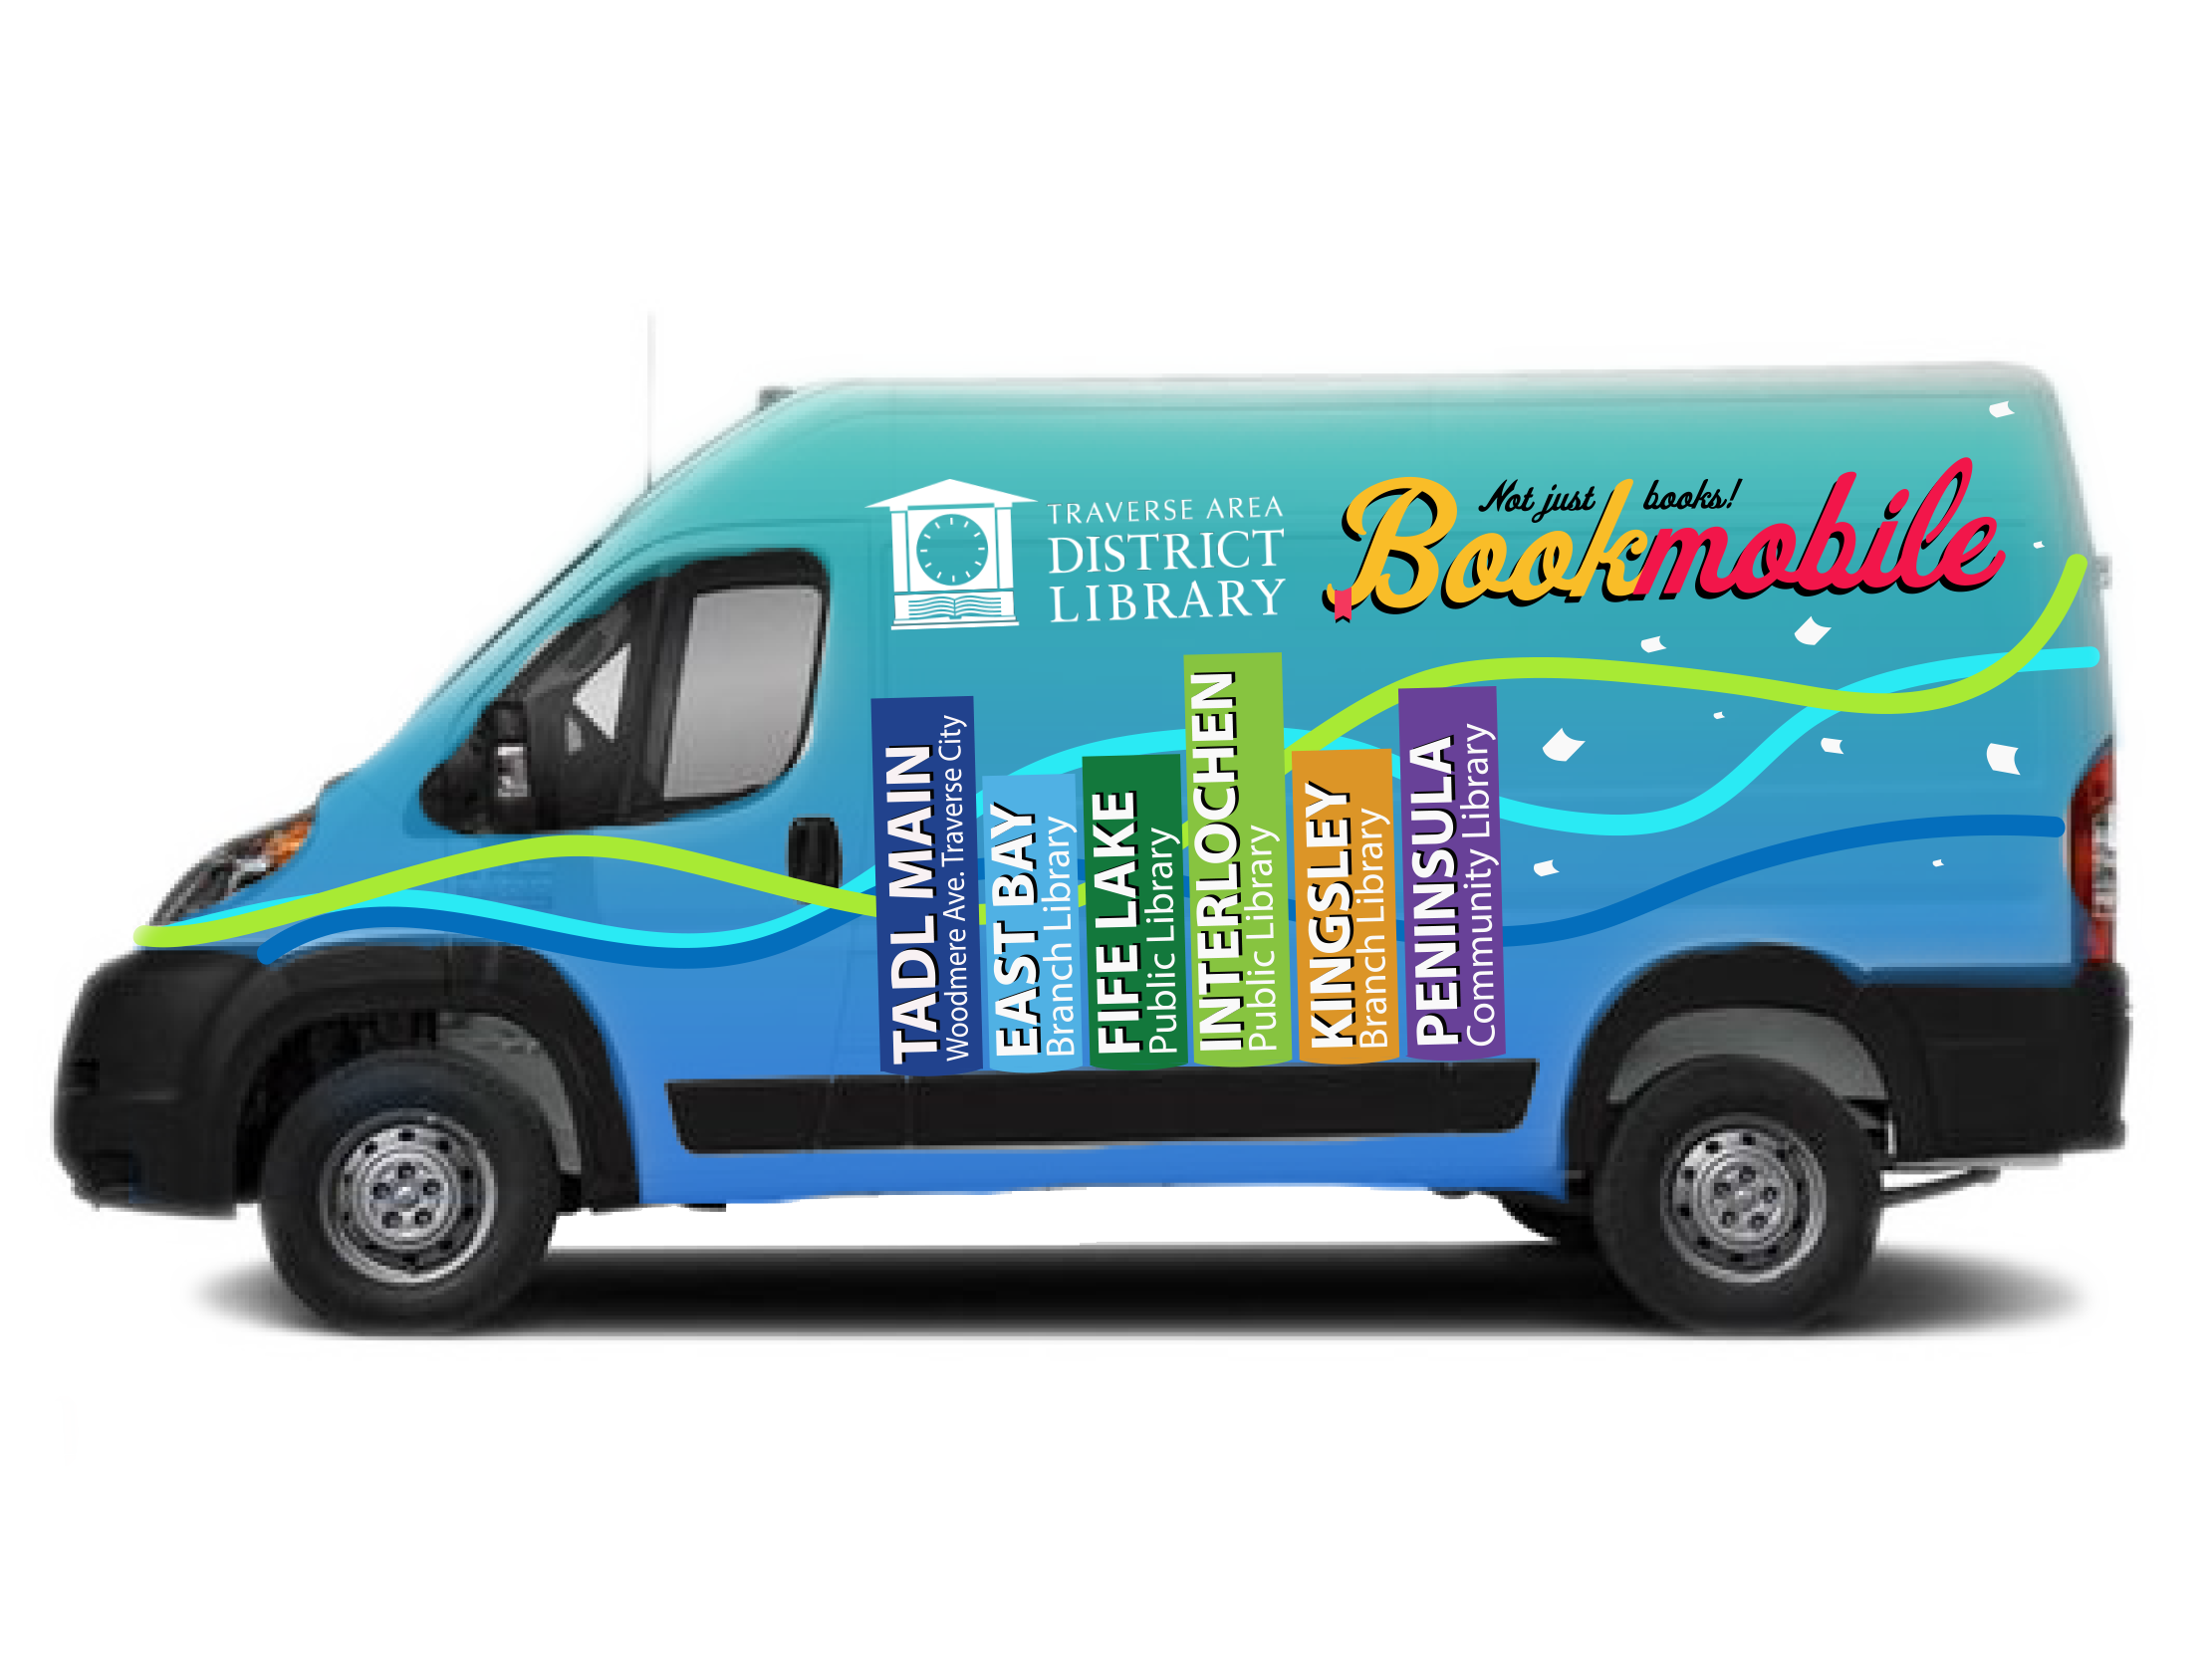 Blue and green bookmobile with the library logo and locations